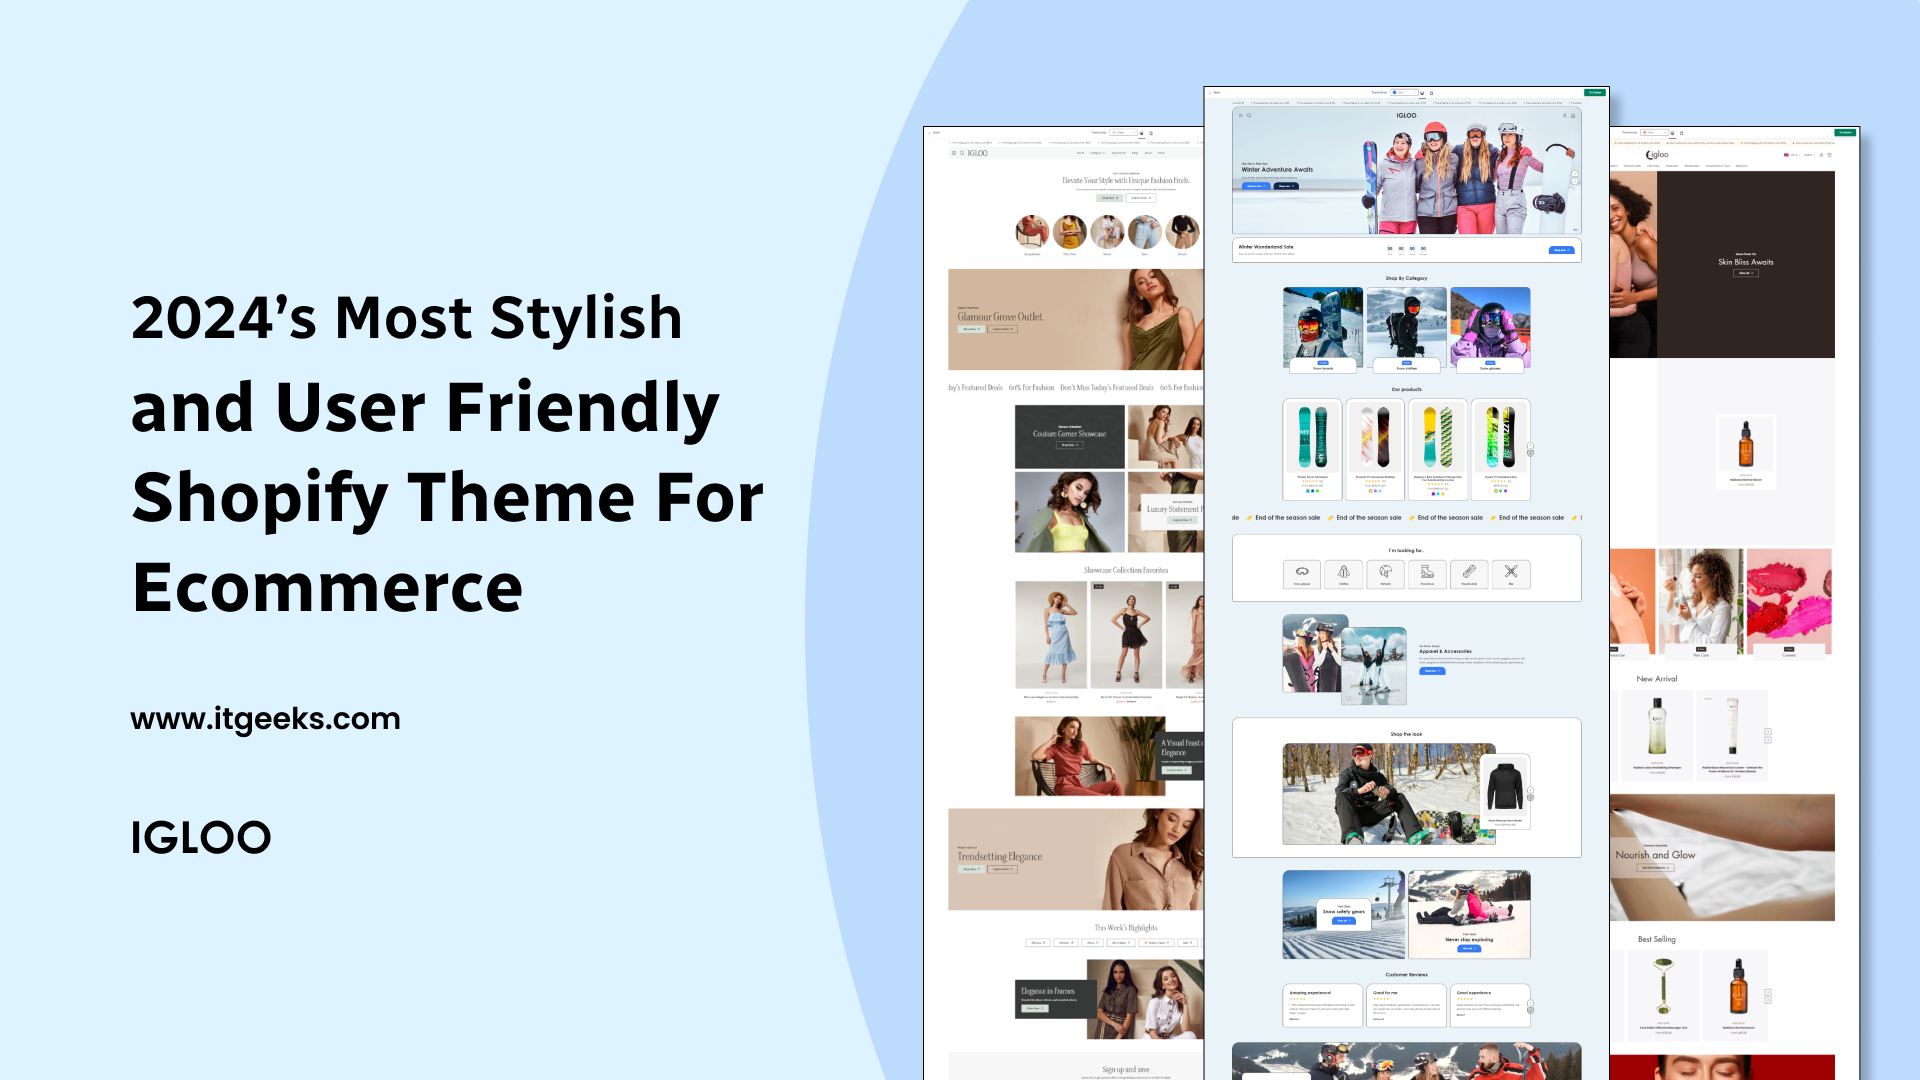 2024’s Most Stylish and User-Friendly Shopify Theme for Ecommerce